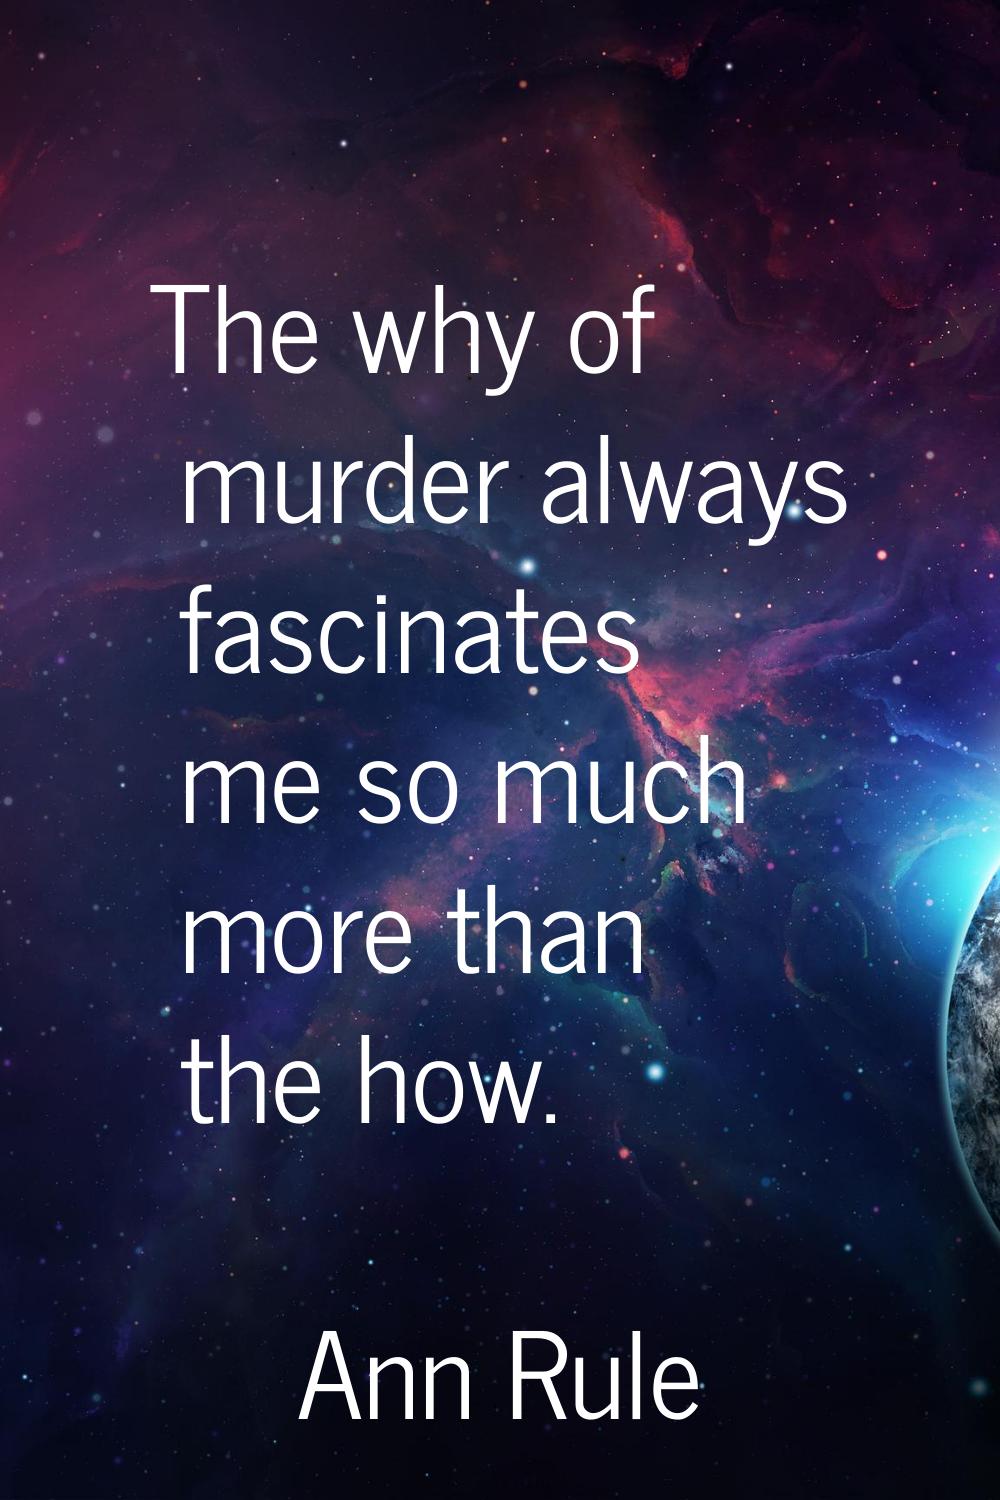 The why of murder always fascinates me so much more than the how.